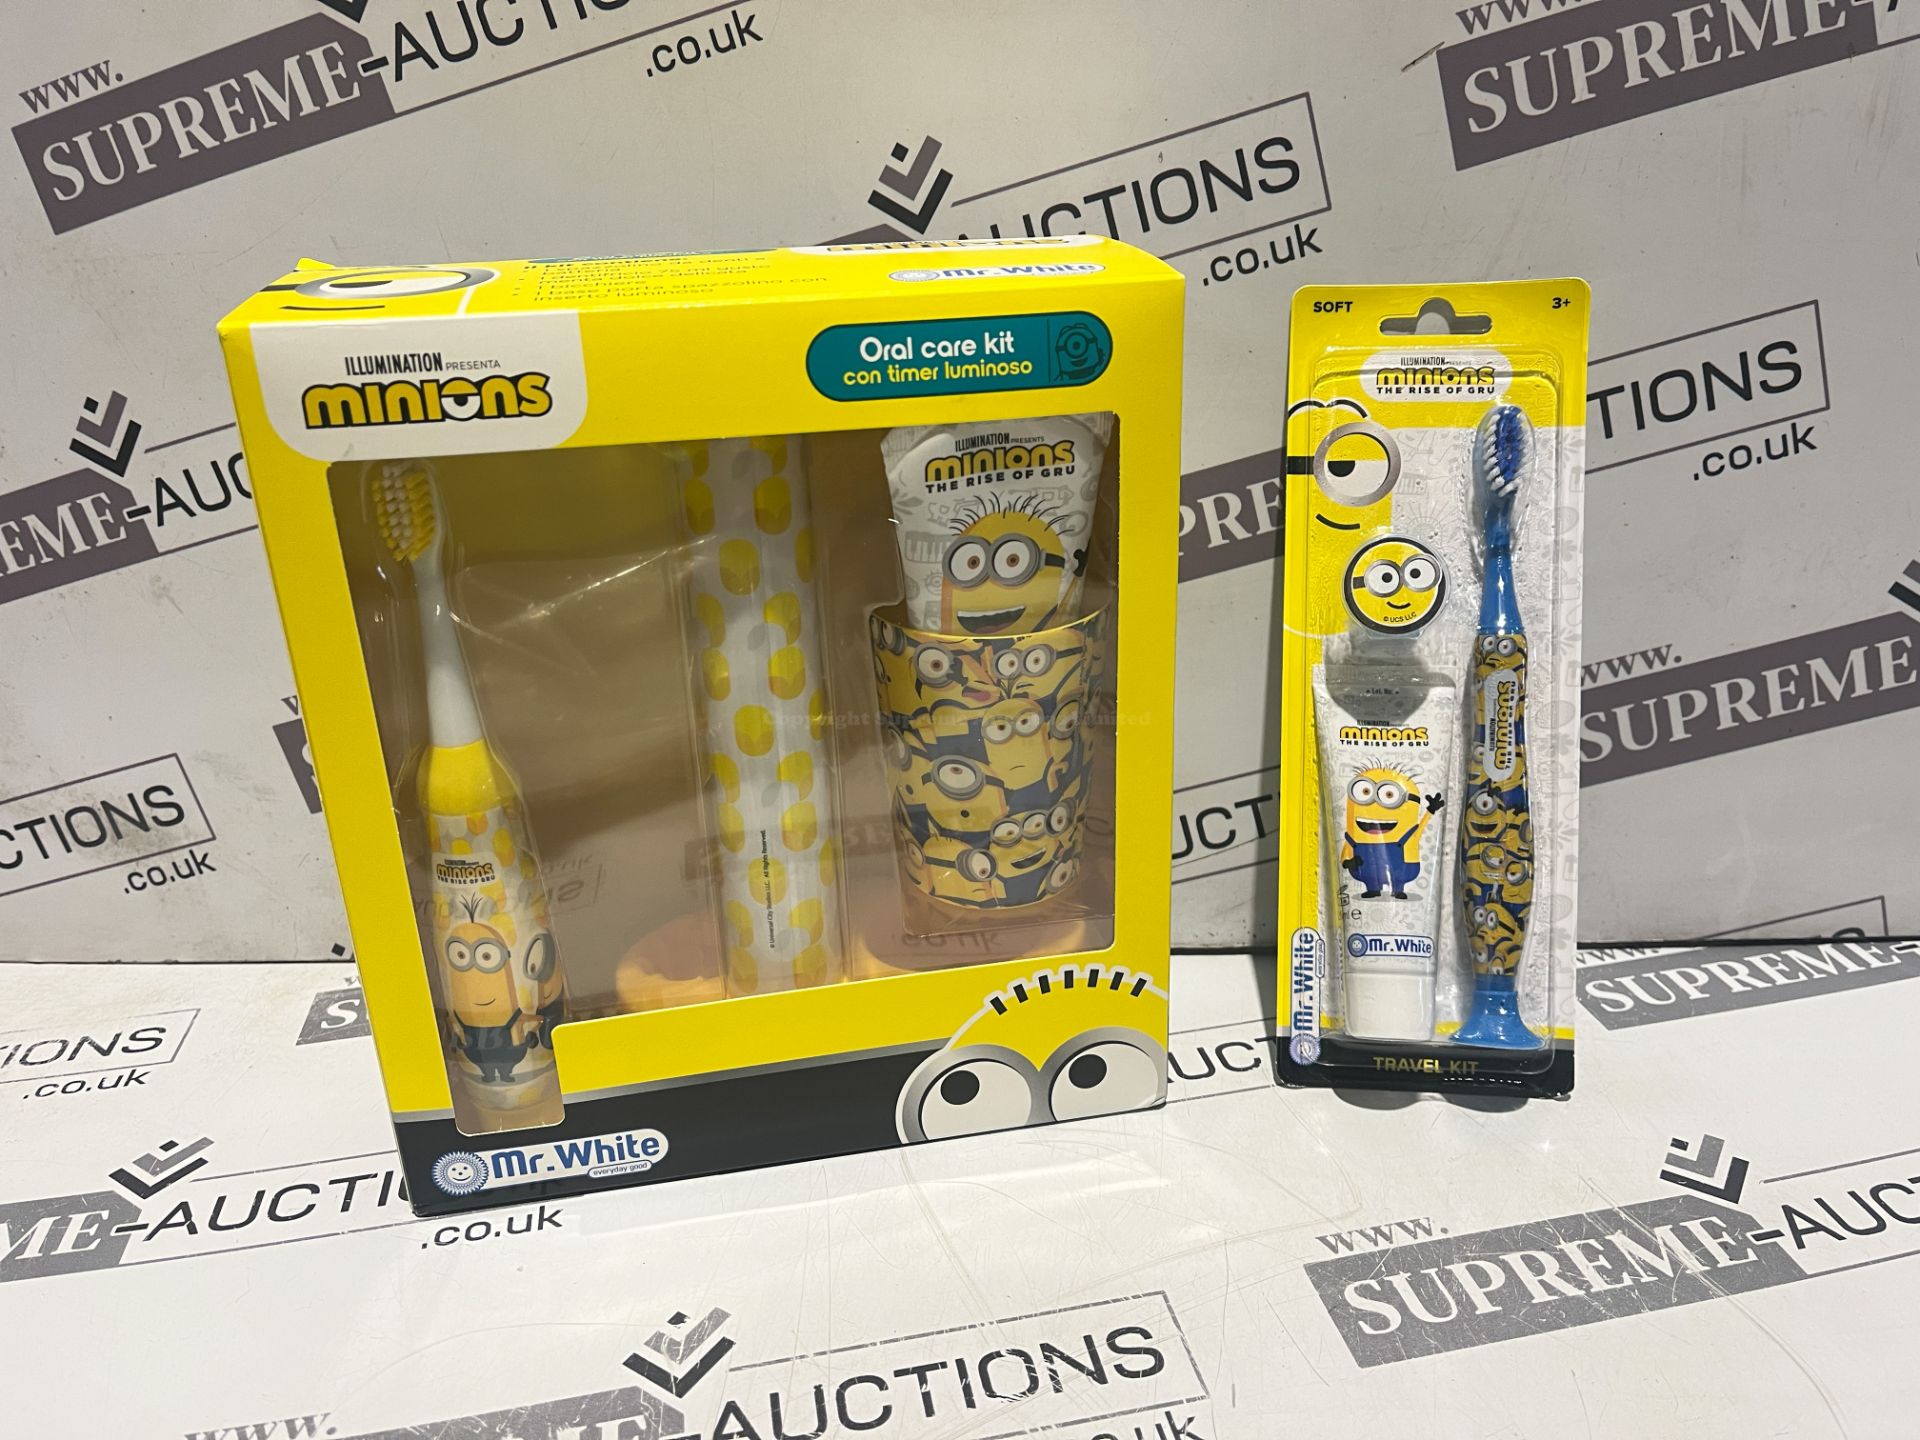 10 X BRAND NEW 2 PIECE CHILDRENS MINIONS ORAL CARE SETS INCLUDING TRAVEL KIT AND ELECTRIC TOOTHBRUSH